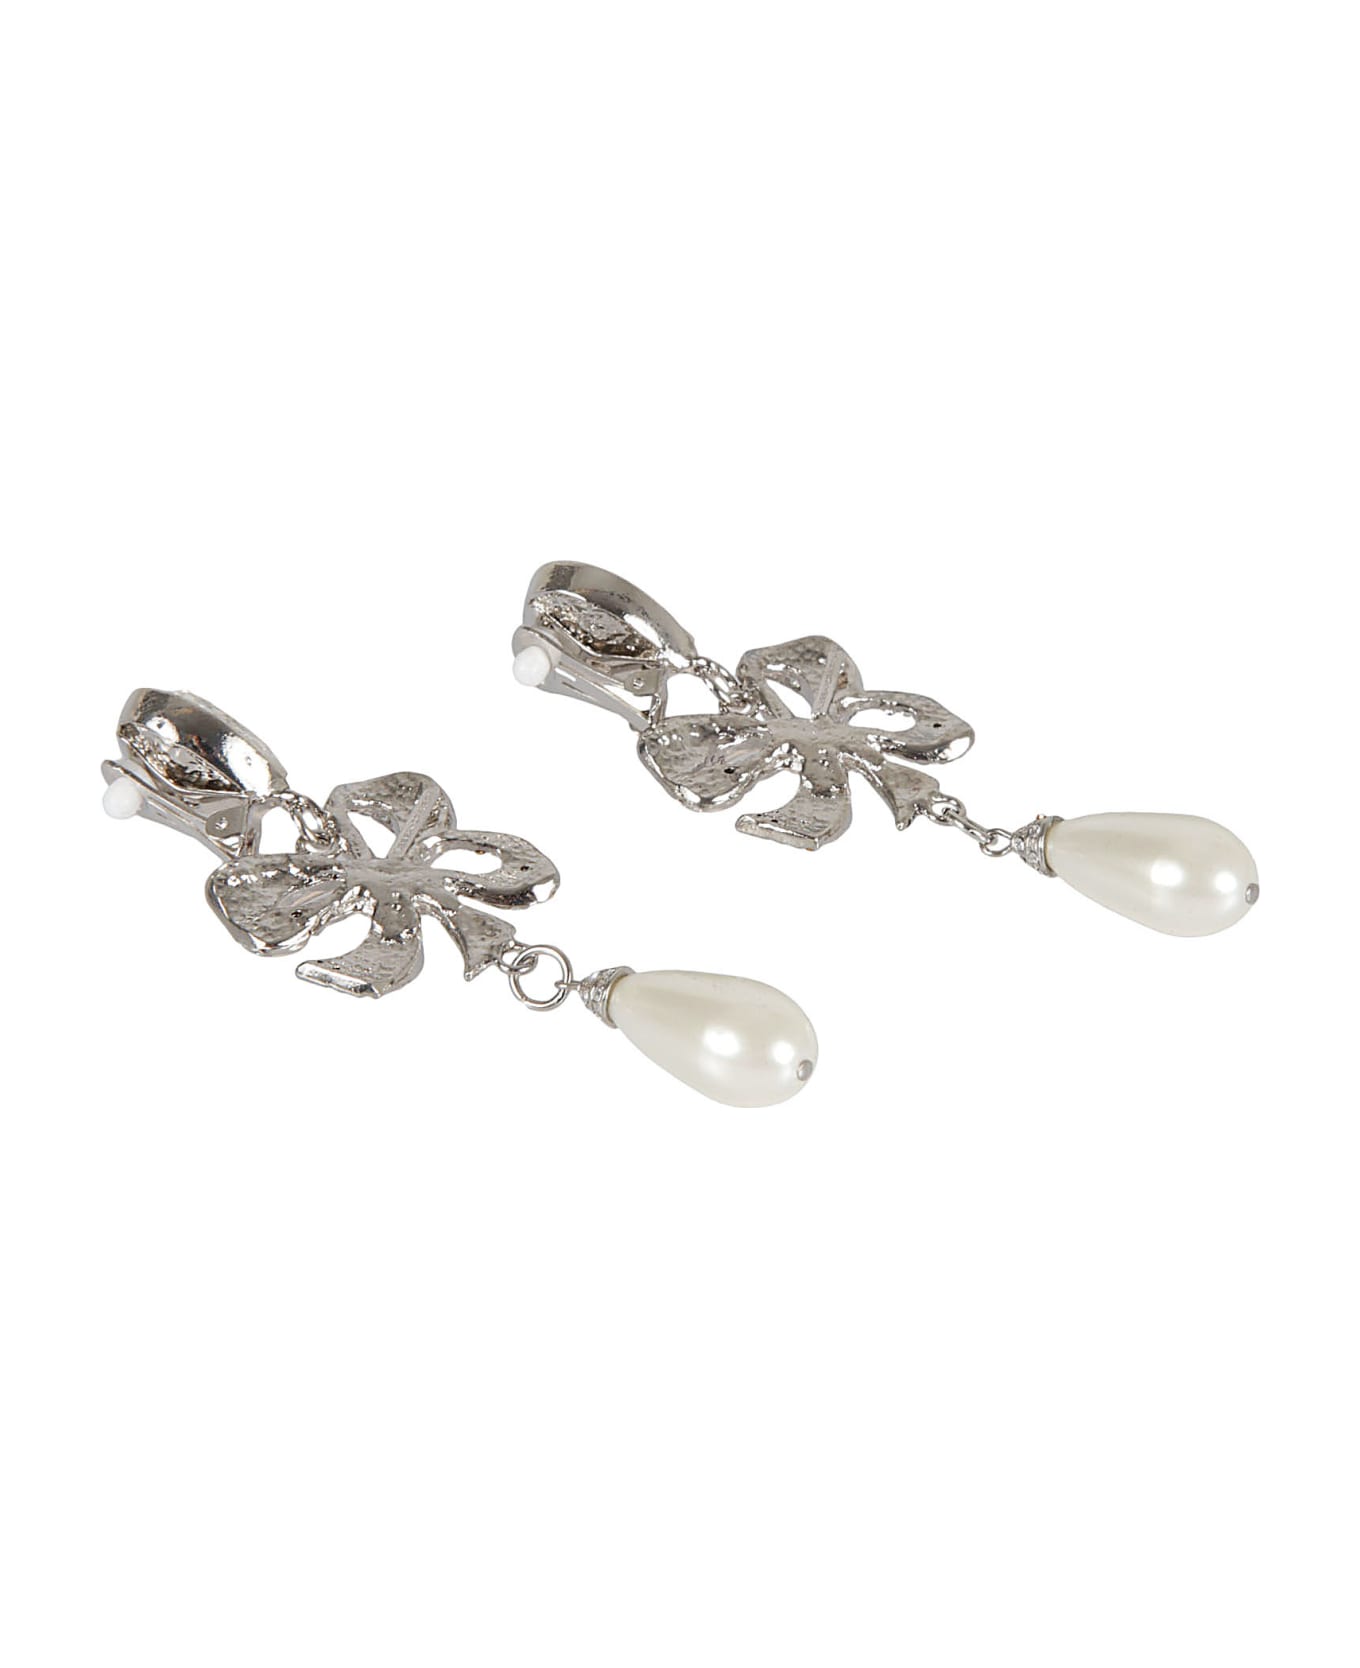 Alessandra Rich Diamond & Pearl Embellished Earrings - Cry Silver